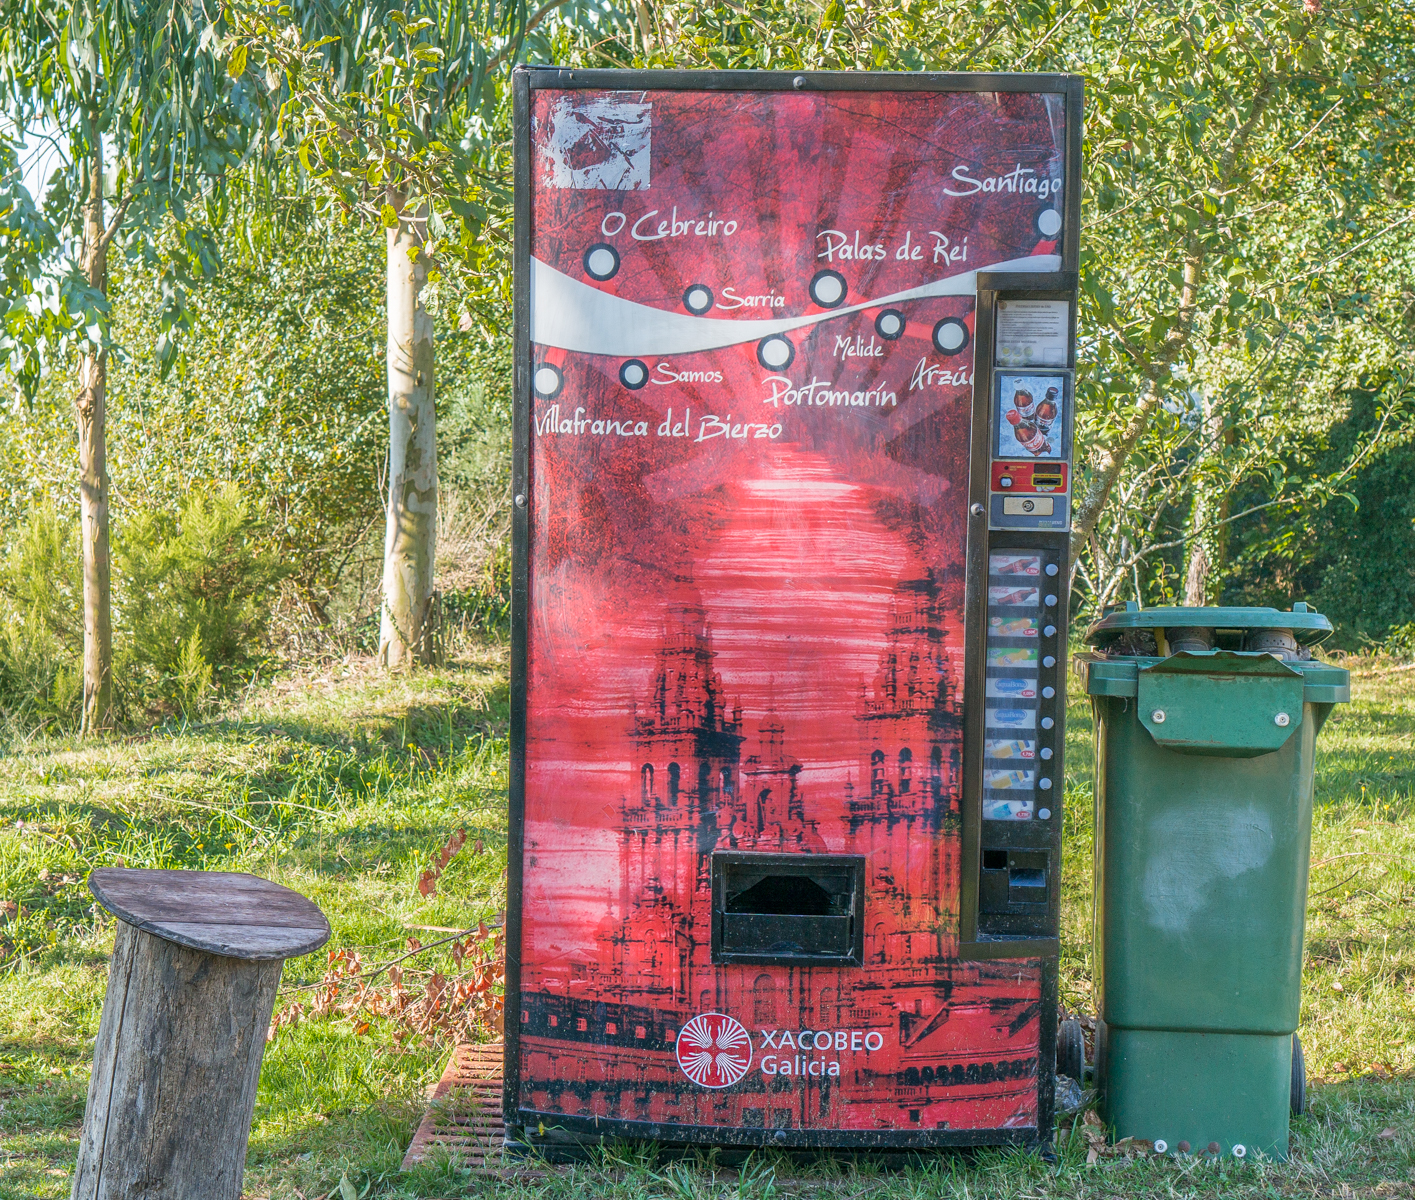 Soft drink vending machine at a secluded location along the Camino Francs west of San Xil, Spain | Photo by Mike Hudak